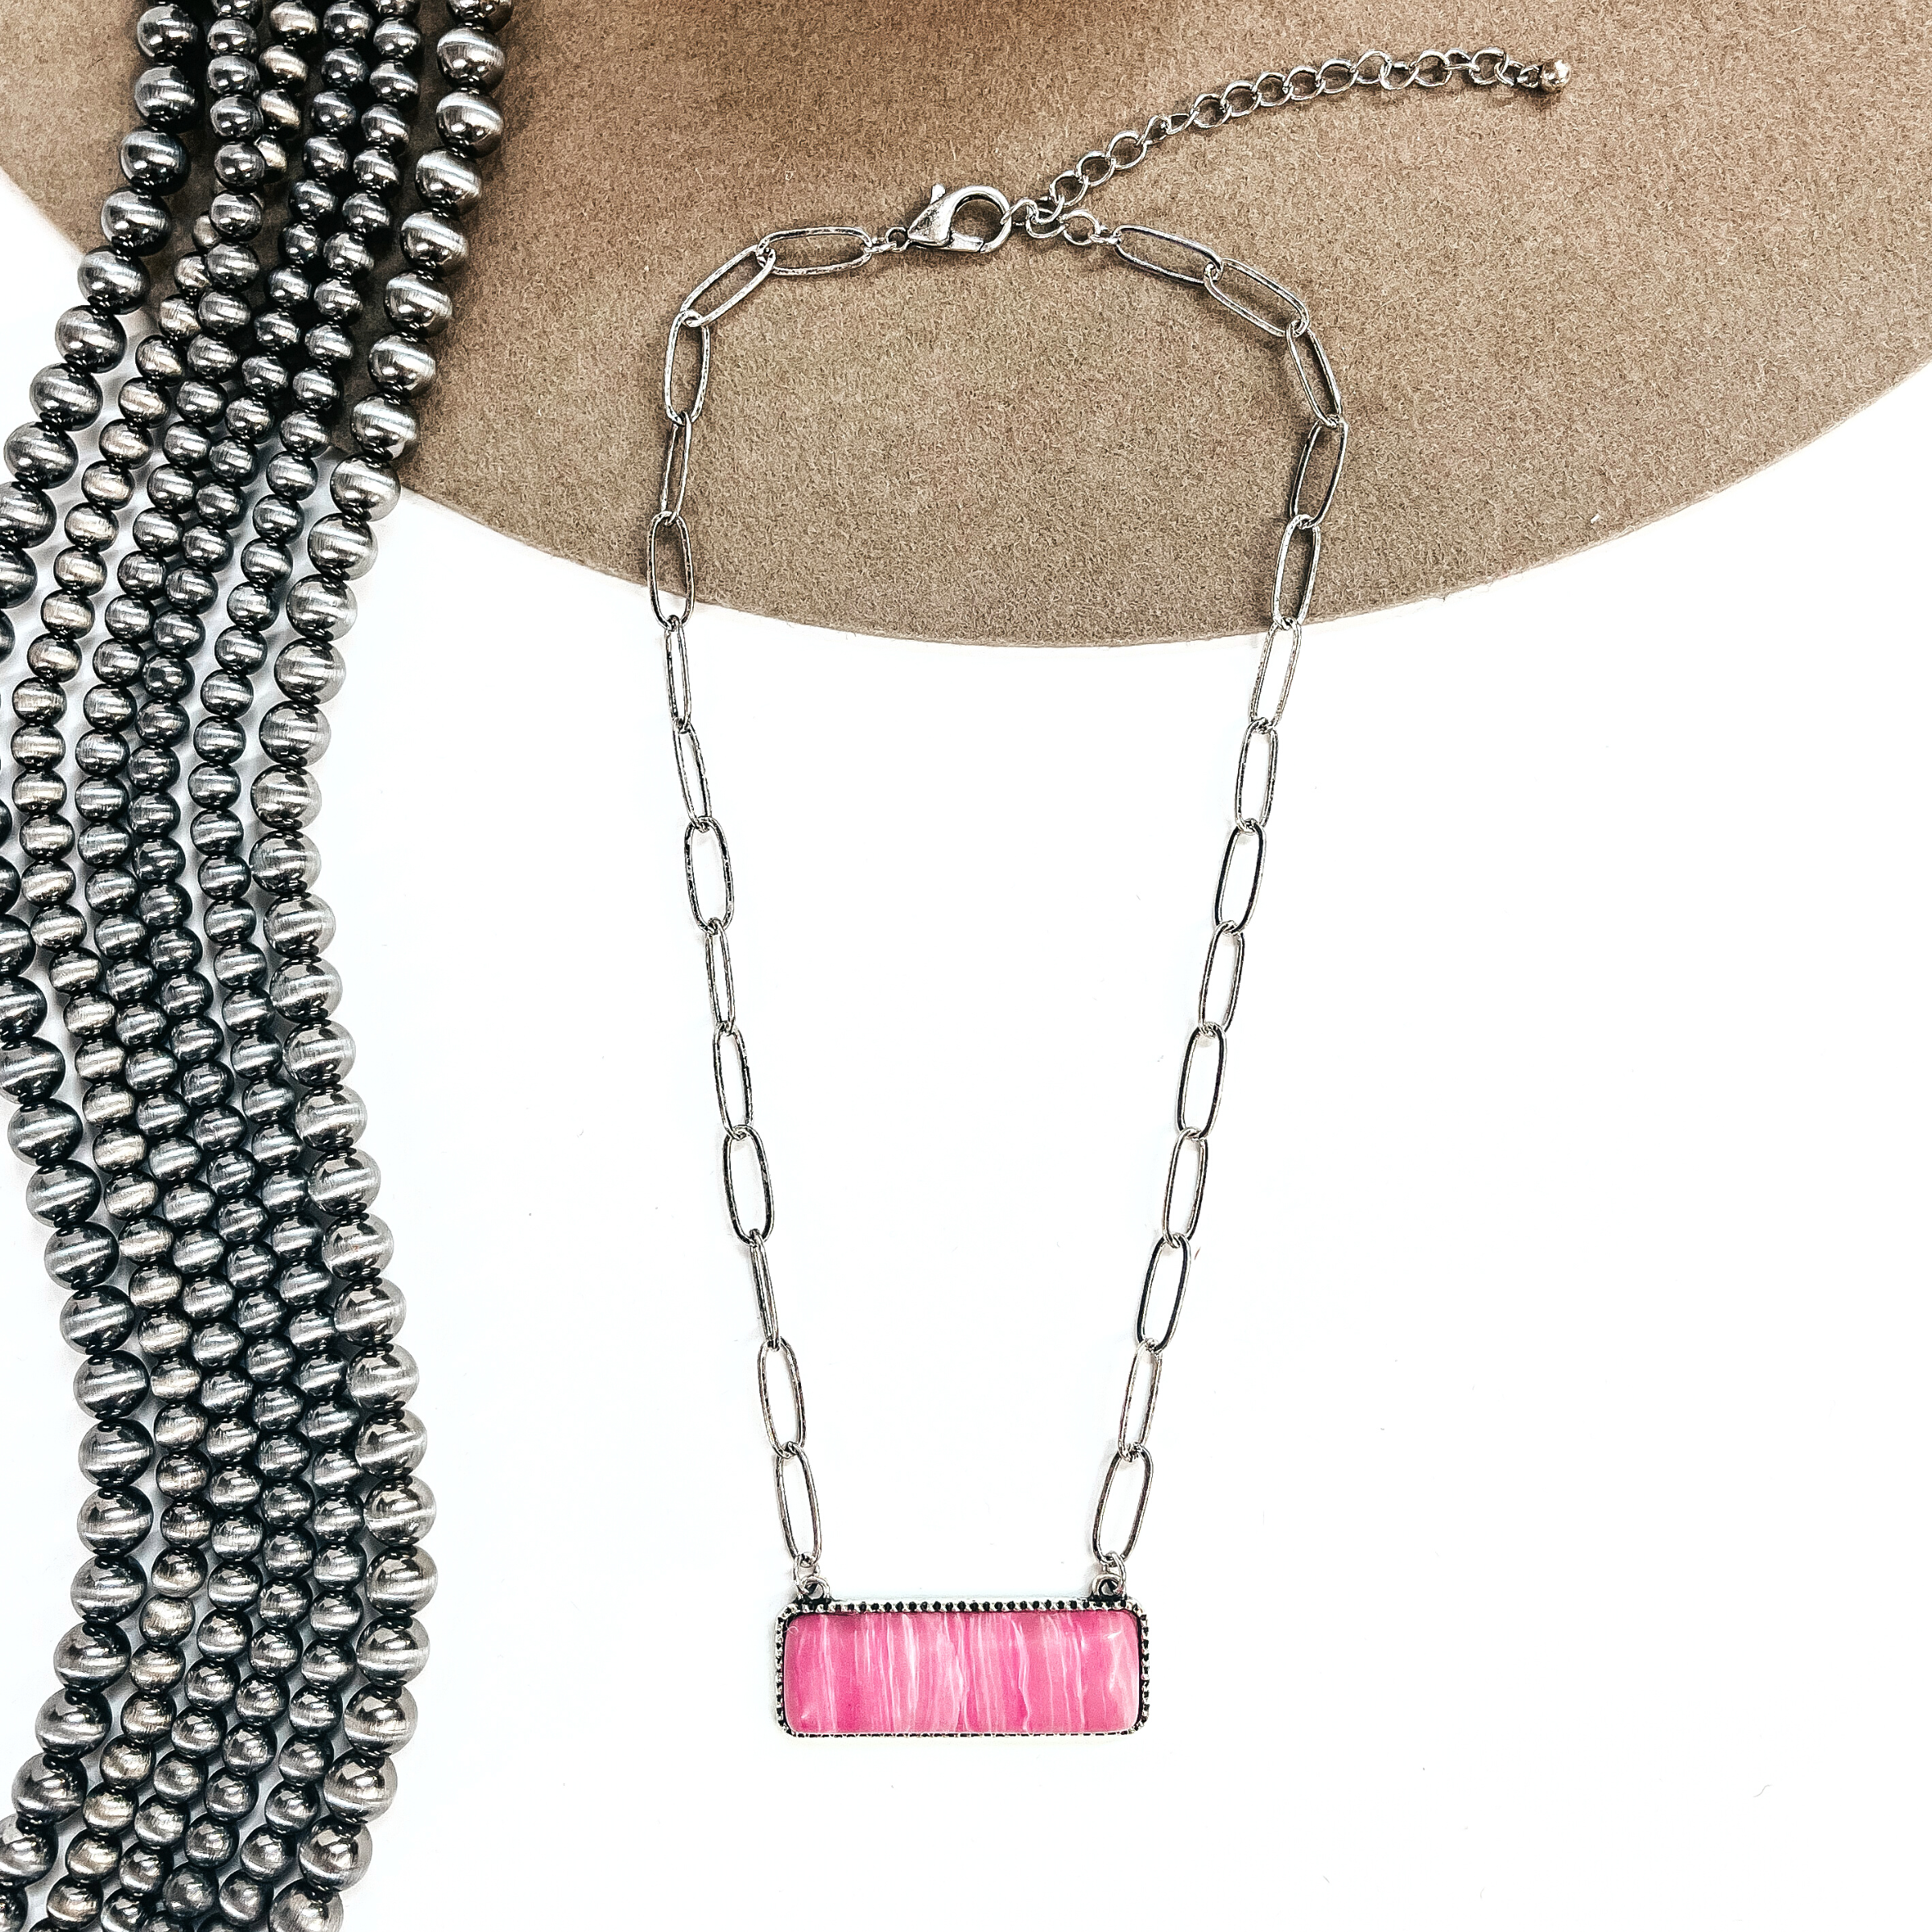 This is a silver tone thin link chain with a rectangle bar pendant in the center. The  rectangle bar pendant has an agate stone in pink. This necklace is laying on a white  background and light brown felt hat brim, with silver Navajo beads in the side as decor.